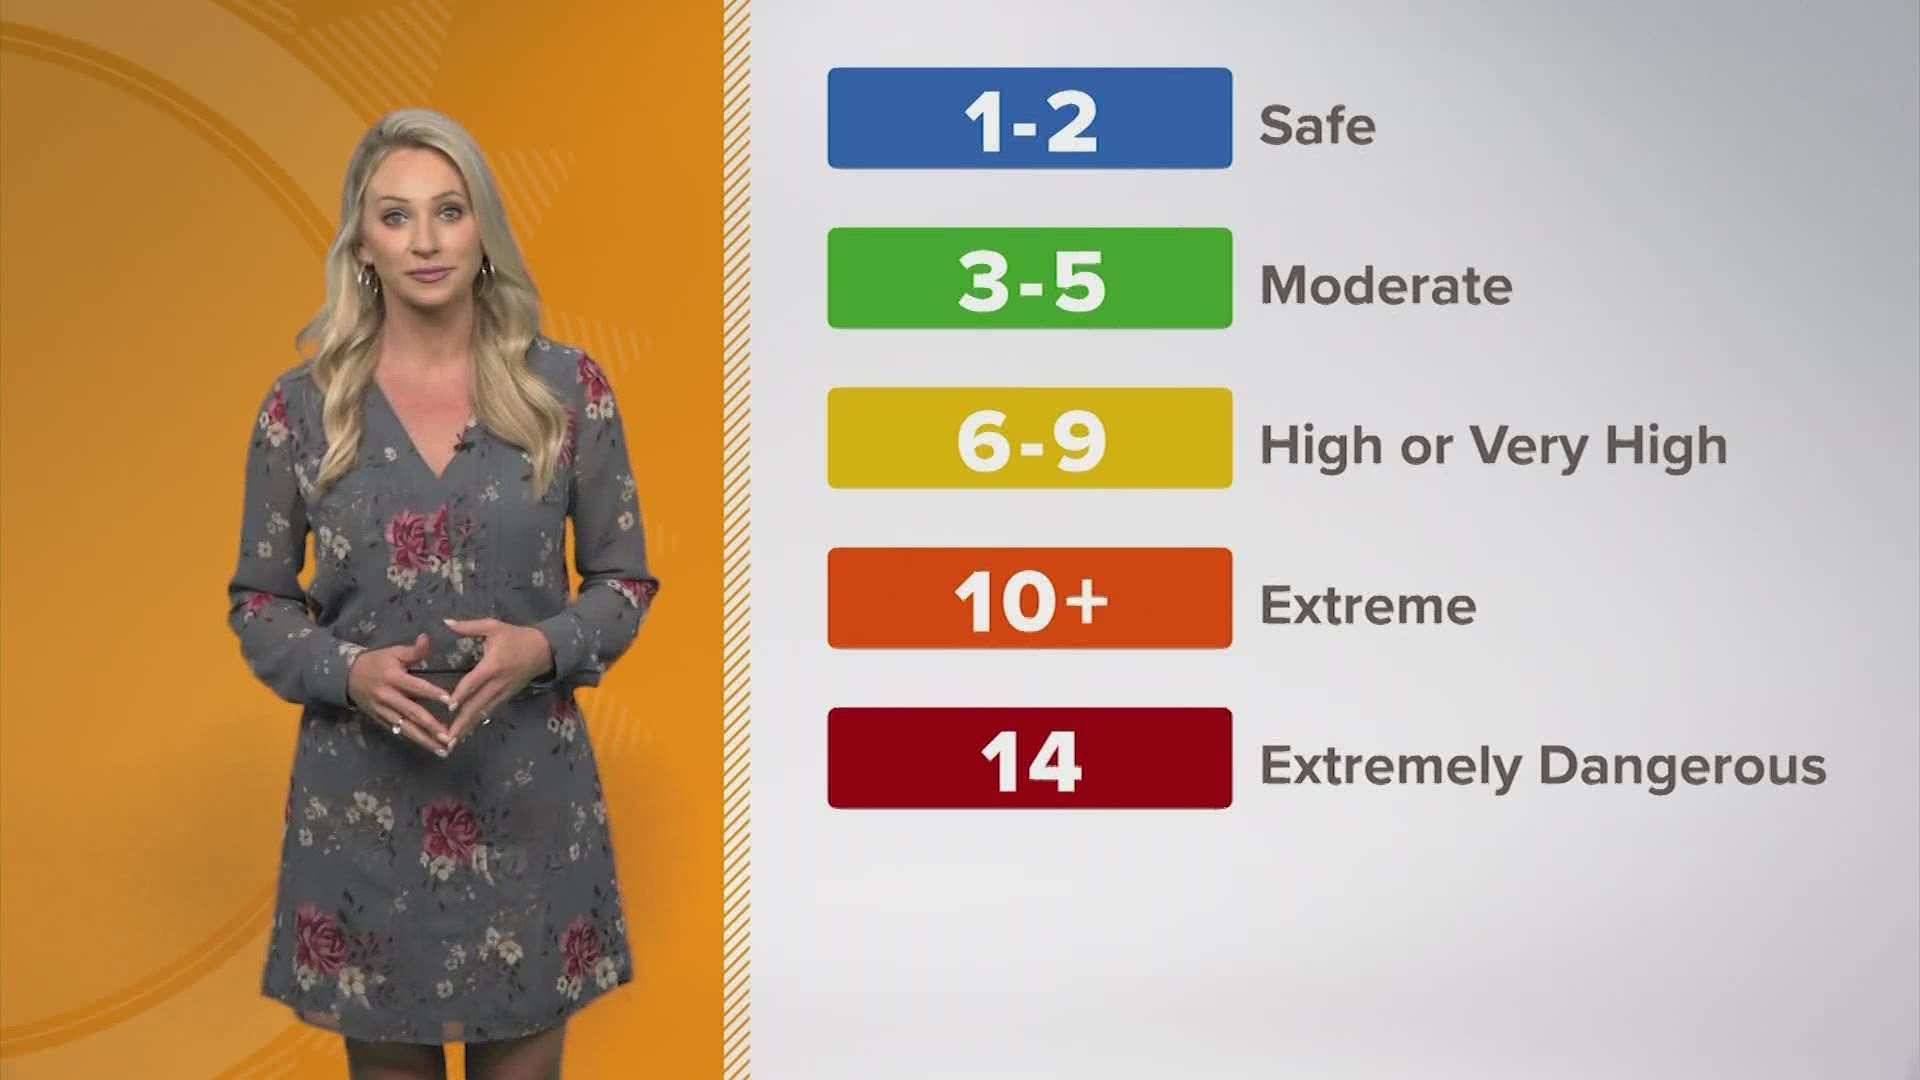 Chita Craft explains what is the UV Index is and why you should take note when it gets extremely and dangerously high.